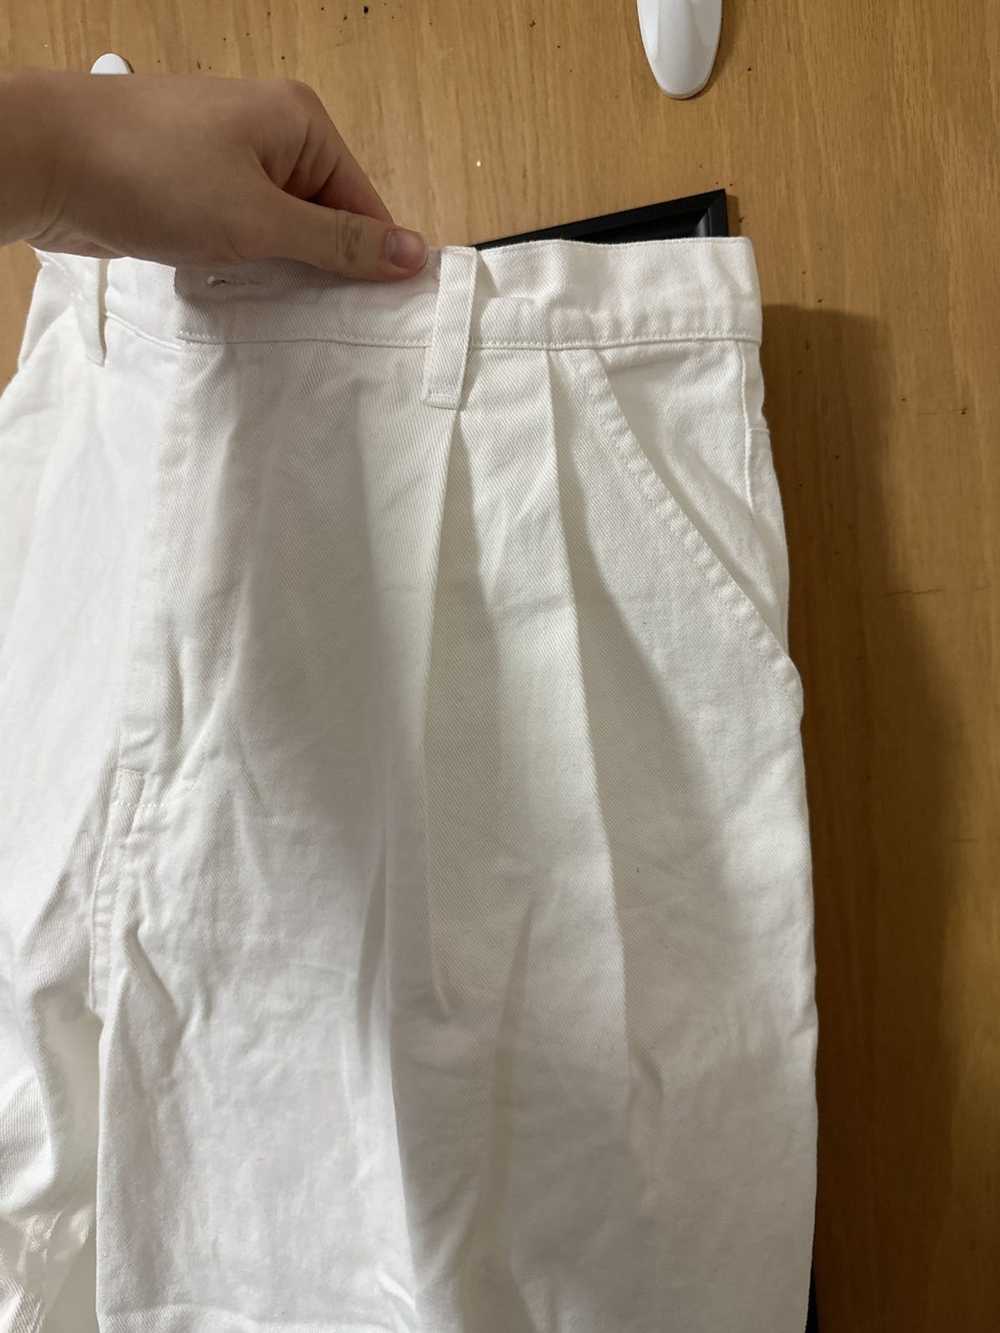 Other Korean Brand White Wide Pants - image 3